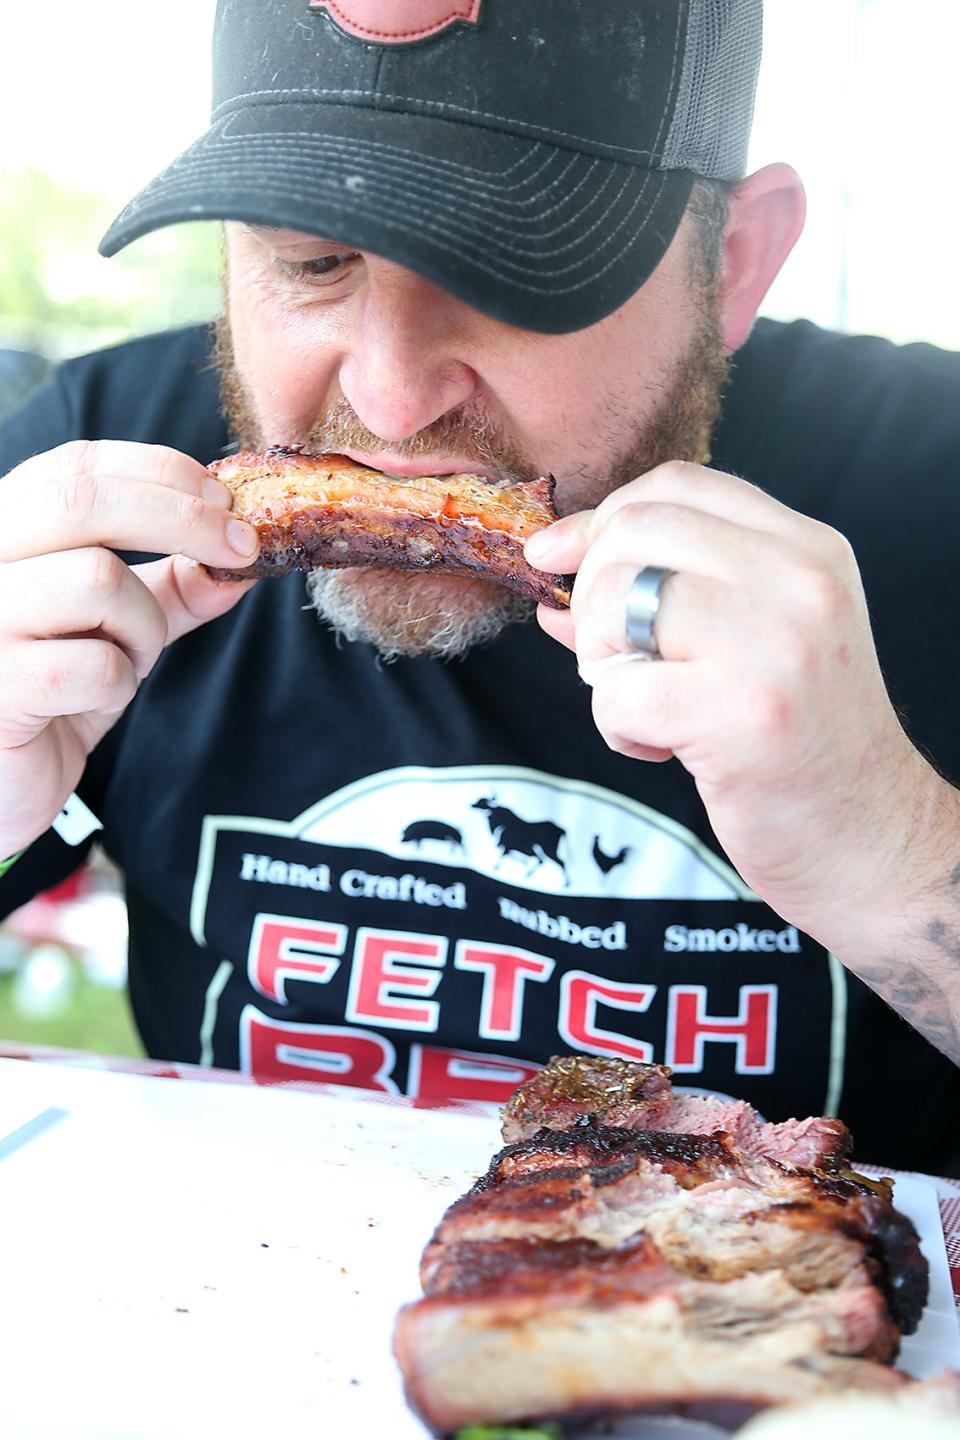 Dan Naples, of Fetch BBQ in Marshfield, takes a bite out of a rib while judging some of the 21 contestants in the Marshfield Community Rib Cook-Off at the Marshfield Fairgrounds on Saturday, Sept. 11, 2021.